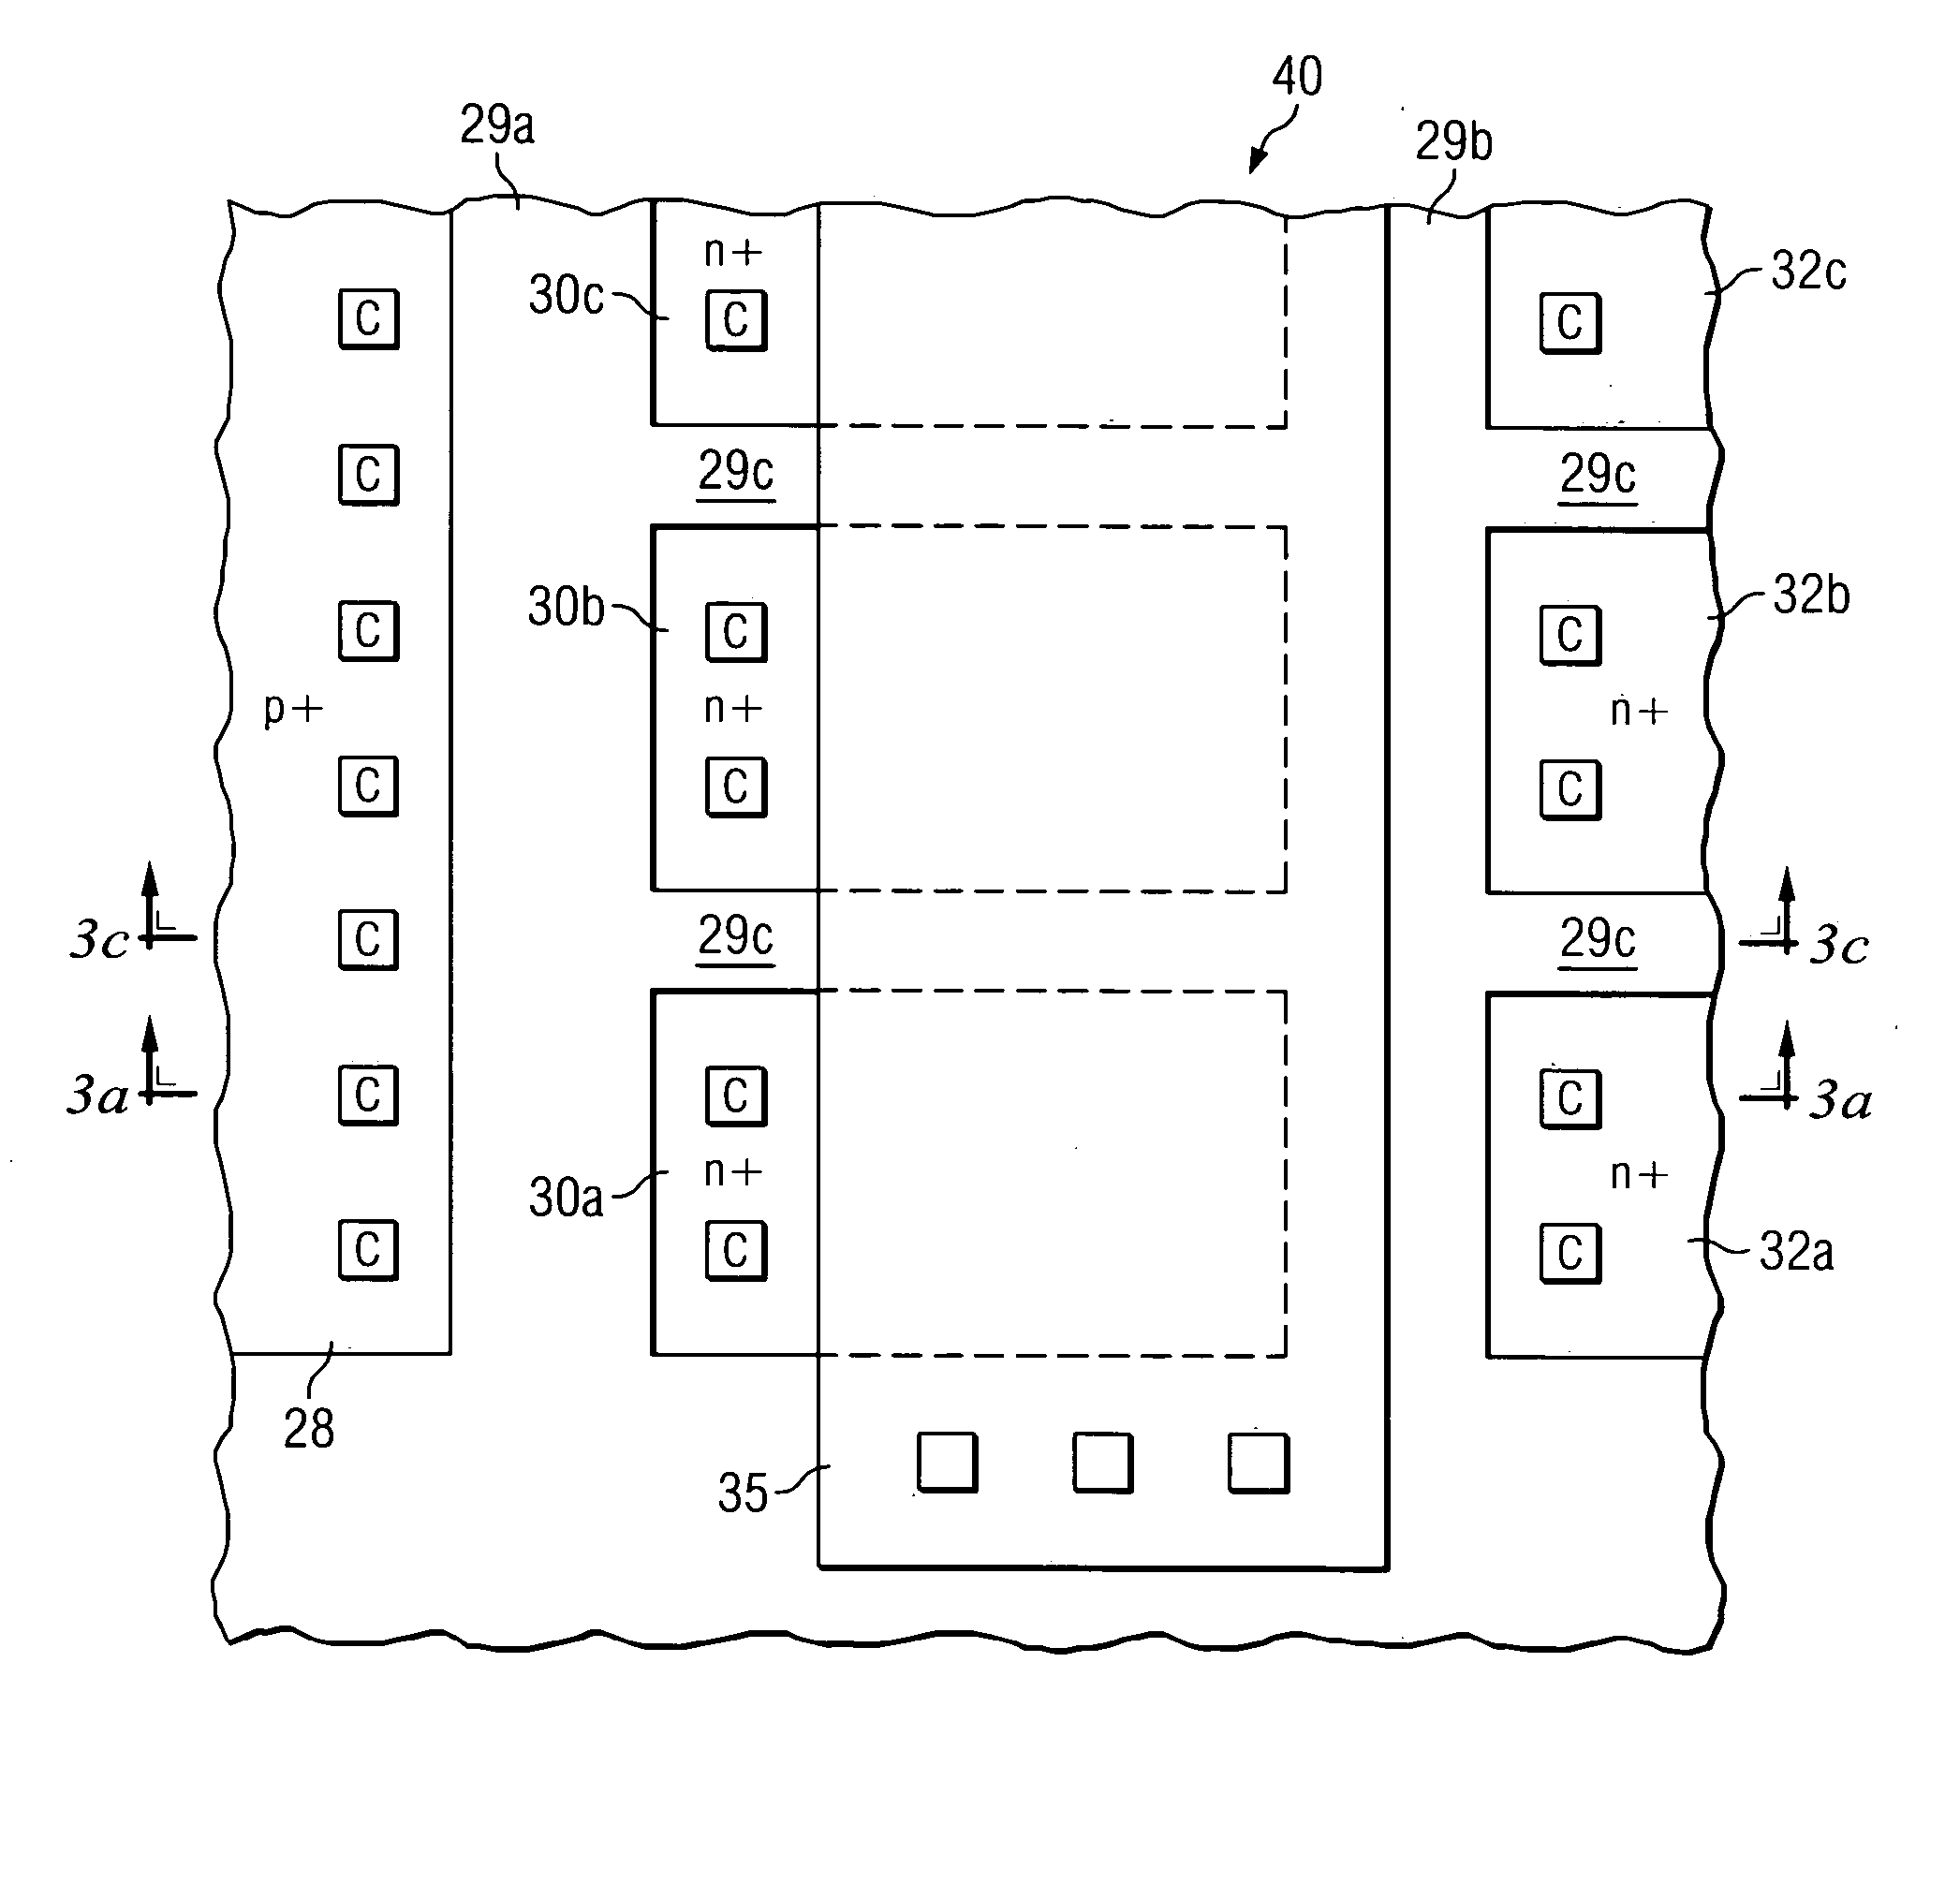 Drain extended MOS transistor with improved breakdown robustness